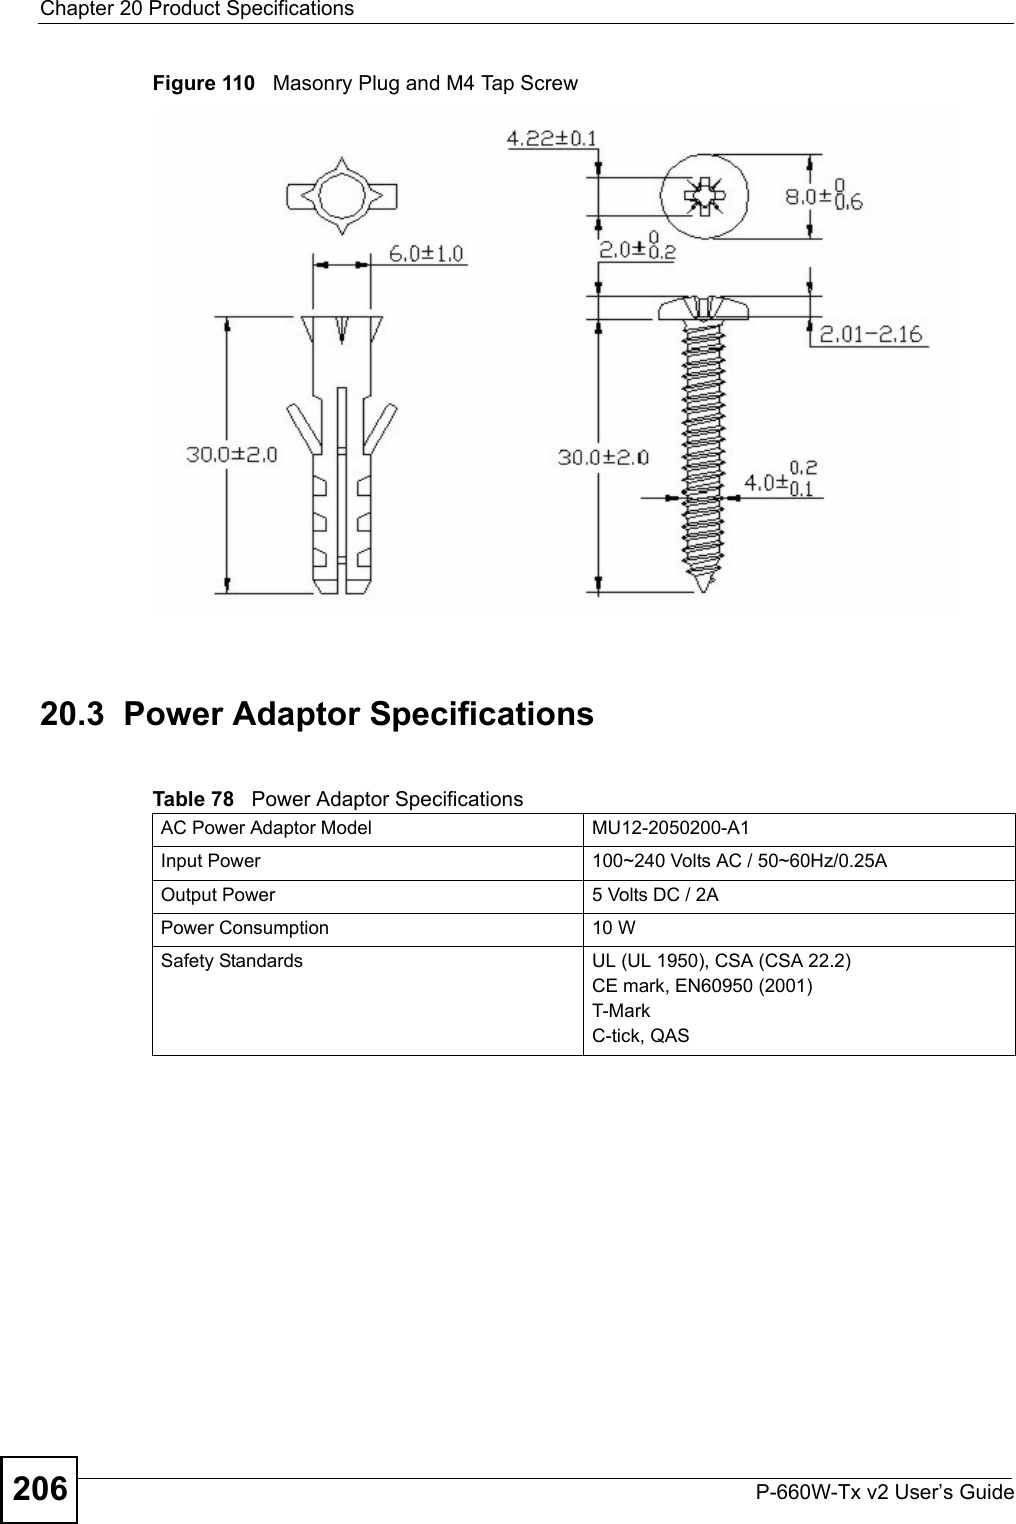 Chapter 20 Product SpecificationsP-660W-Tx v2 User’s Guide206Figure 110   Masonry Plug and M4 Tap Screw20.3  Power Adaptor SpecificationsTable 78   Power Adaptor SpecificationsAC Power Adaptor Model  MU12-2050200-A1Input Power 100~240 Volts AC / 50~60Hz/0.25AOutput Power  5 Volts DC / 2APower Consumption 10 WSafety Standards  UL (UL 1950), CSA (CSA 22.2)CE mark, EN60950 (2001) T-Mark C-tick, QAS